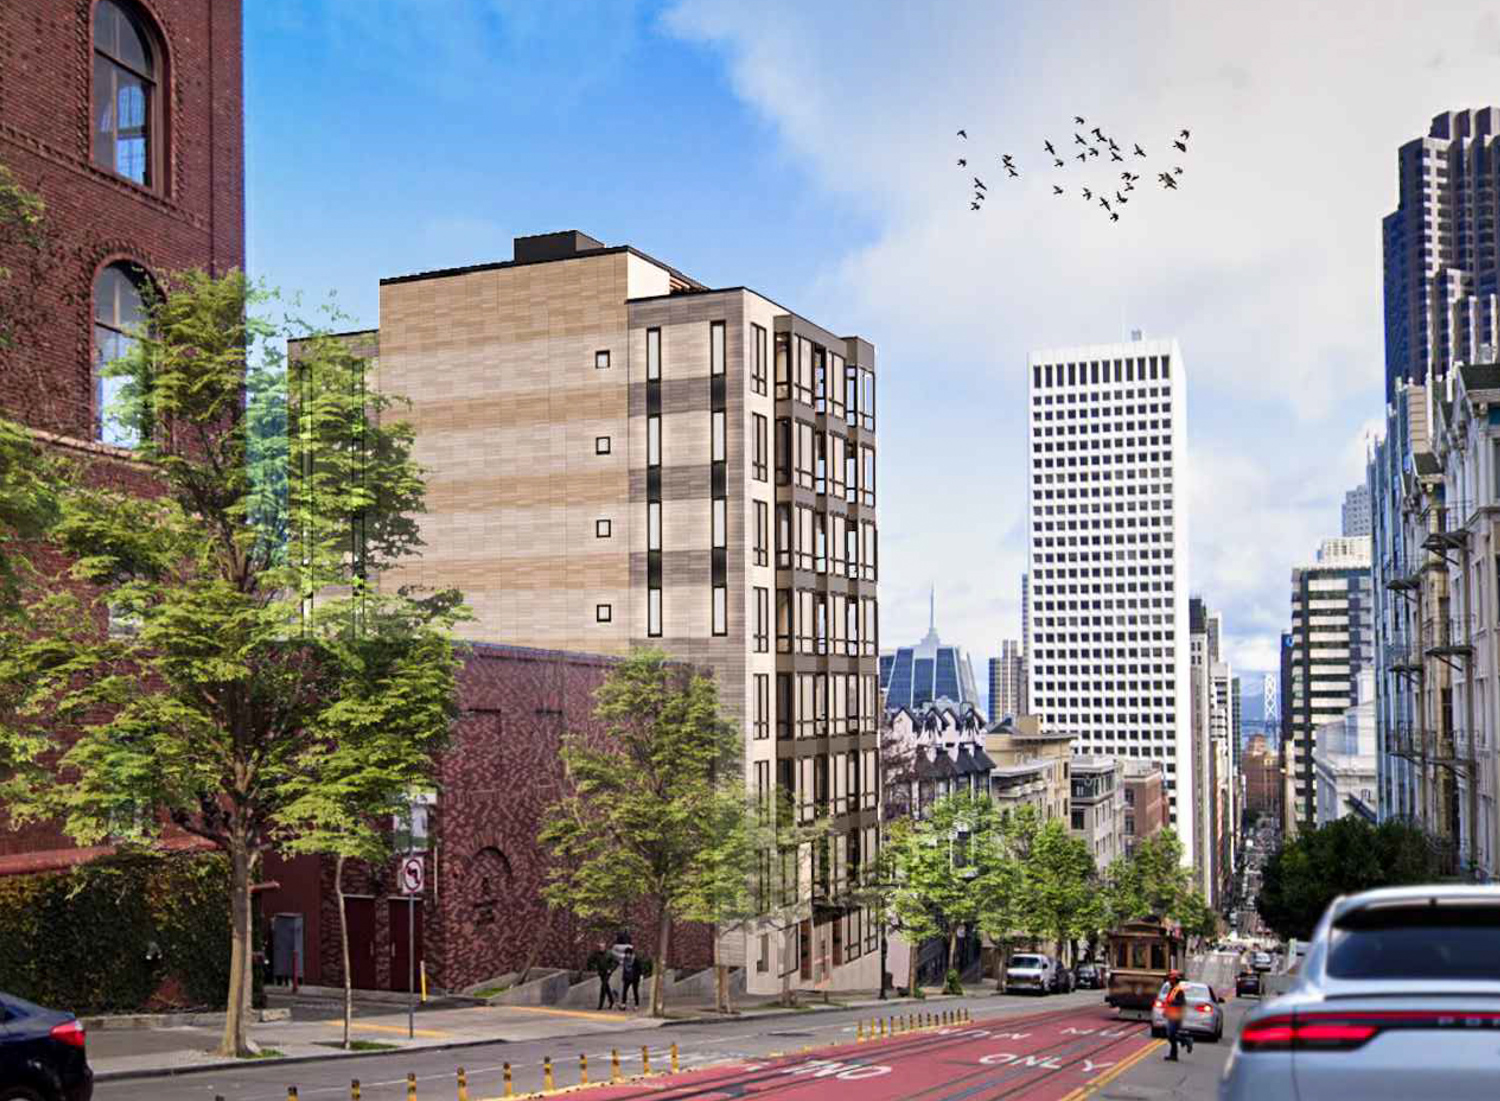 842 California Street facing with 650 California Street in the background, rendering by Cass Calder Smith